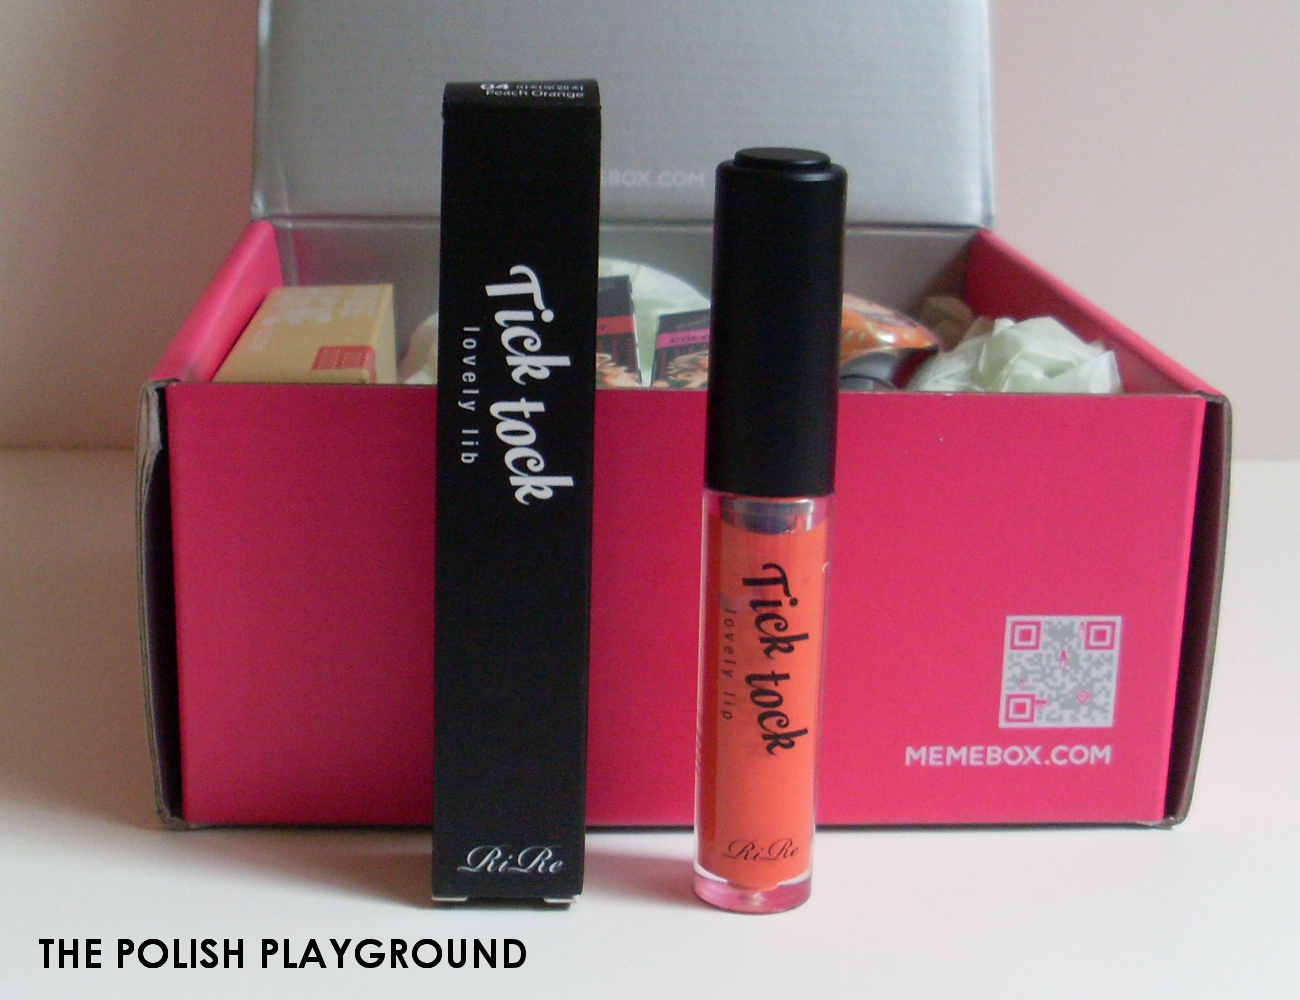 Memebox Superbox #49 All About Lips Unboxing - RiRe Tick Tock Lip Gloss in 04 Peach Orange